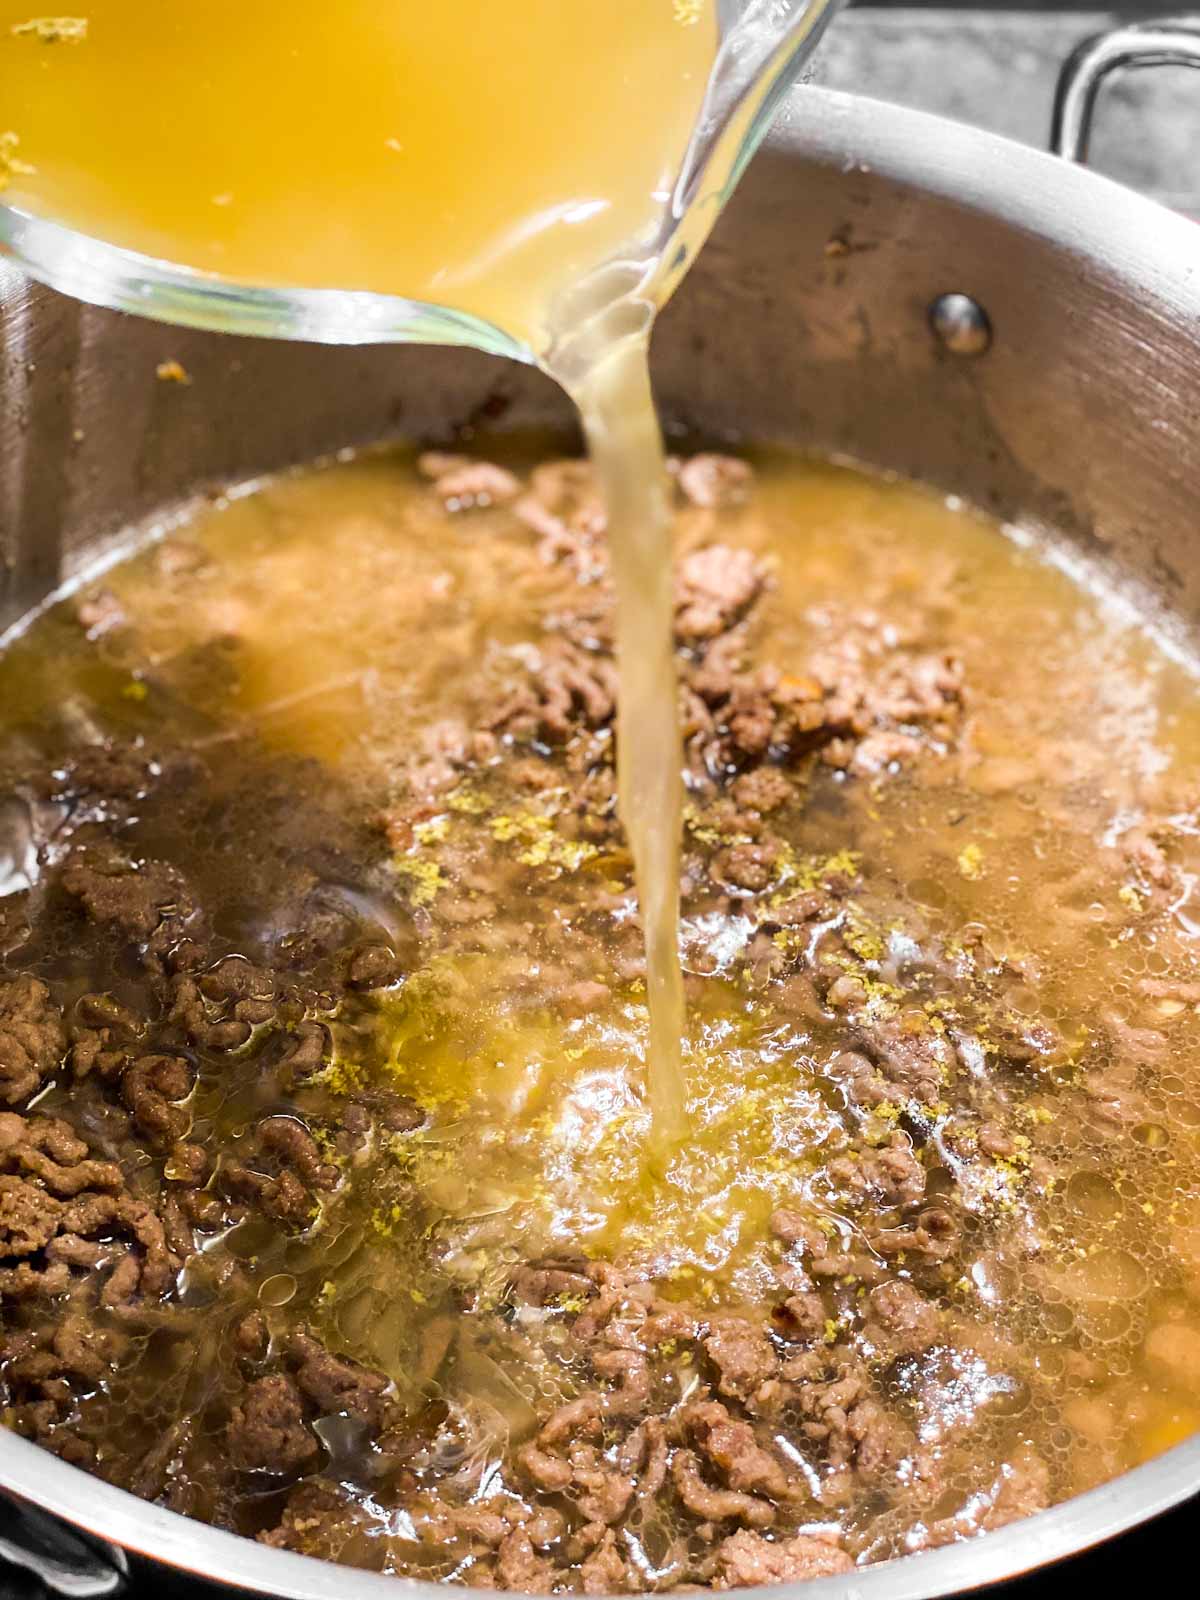 beef broth pouring from glass measuring jug into skillet with ground beef